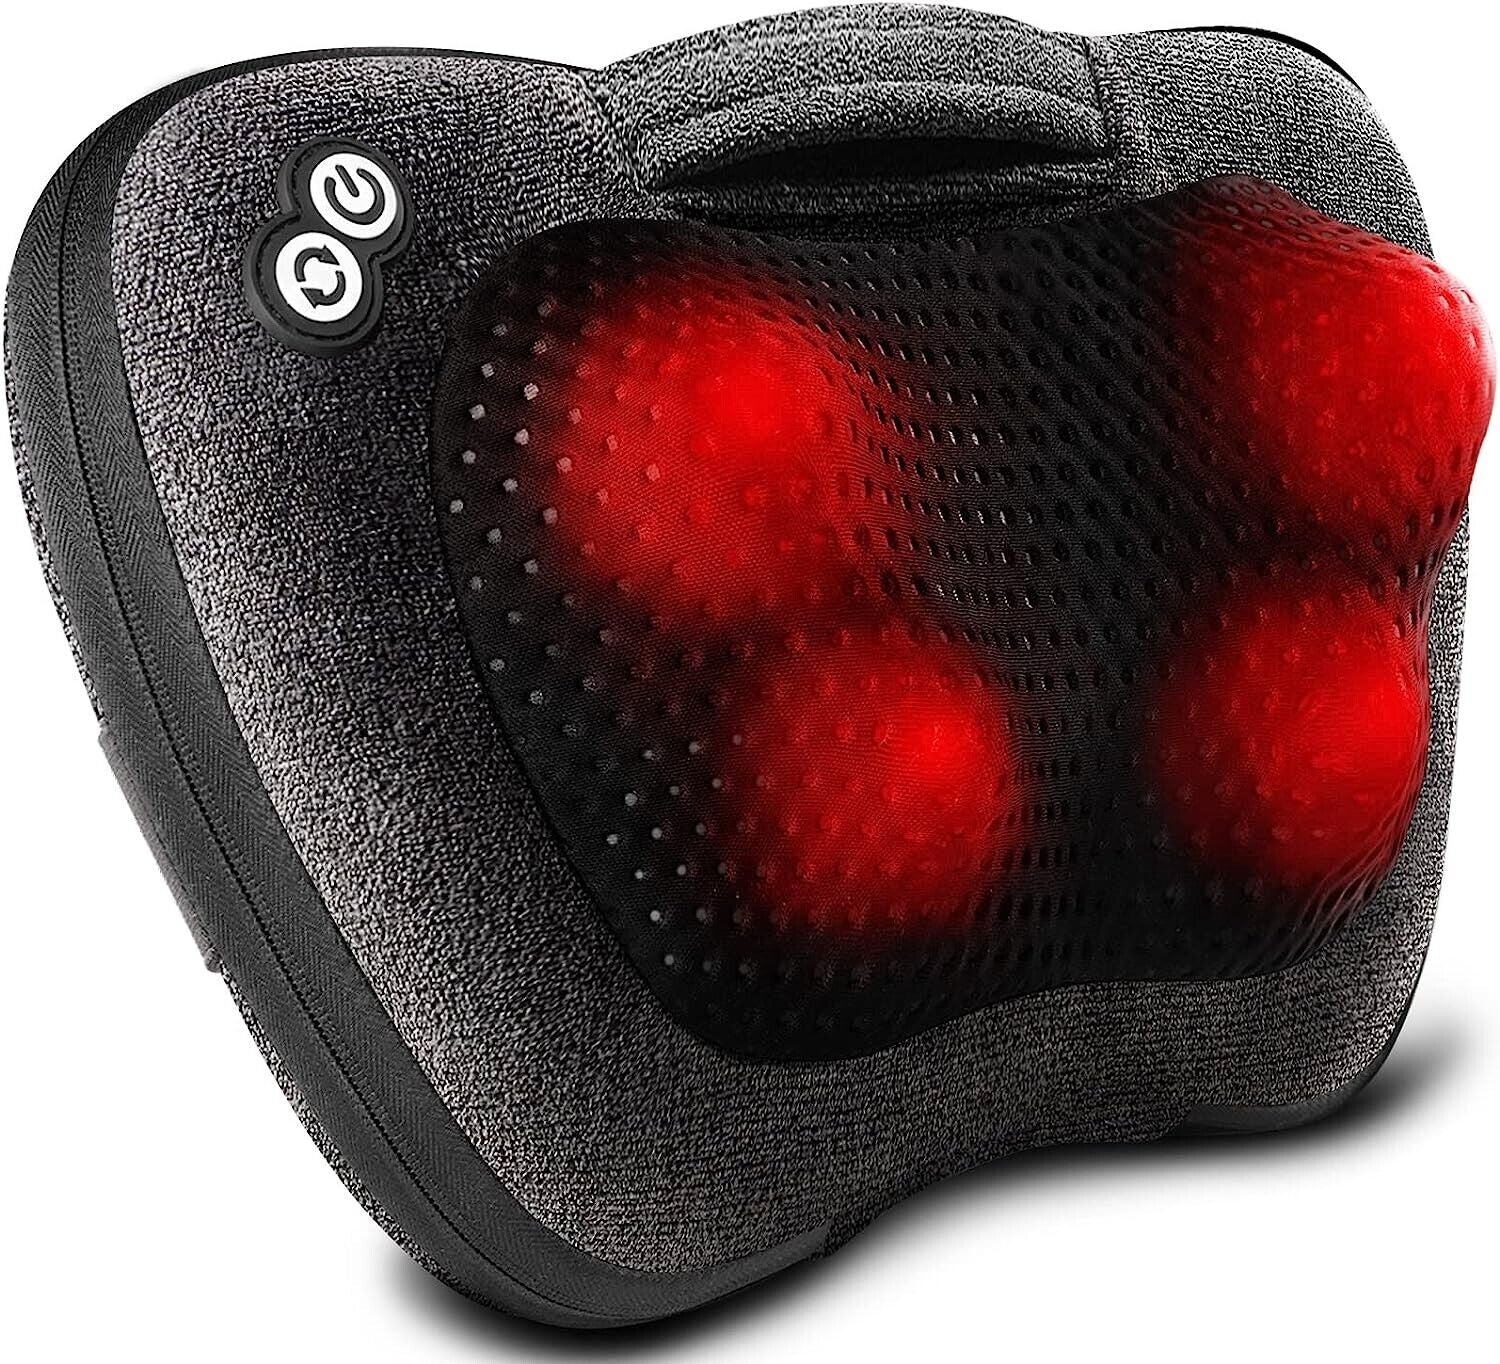 Heated Neck and Back Massage Pillow: Your Personal Relaxation Haven